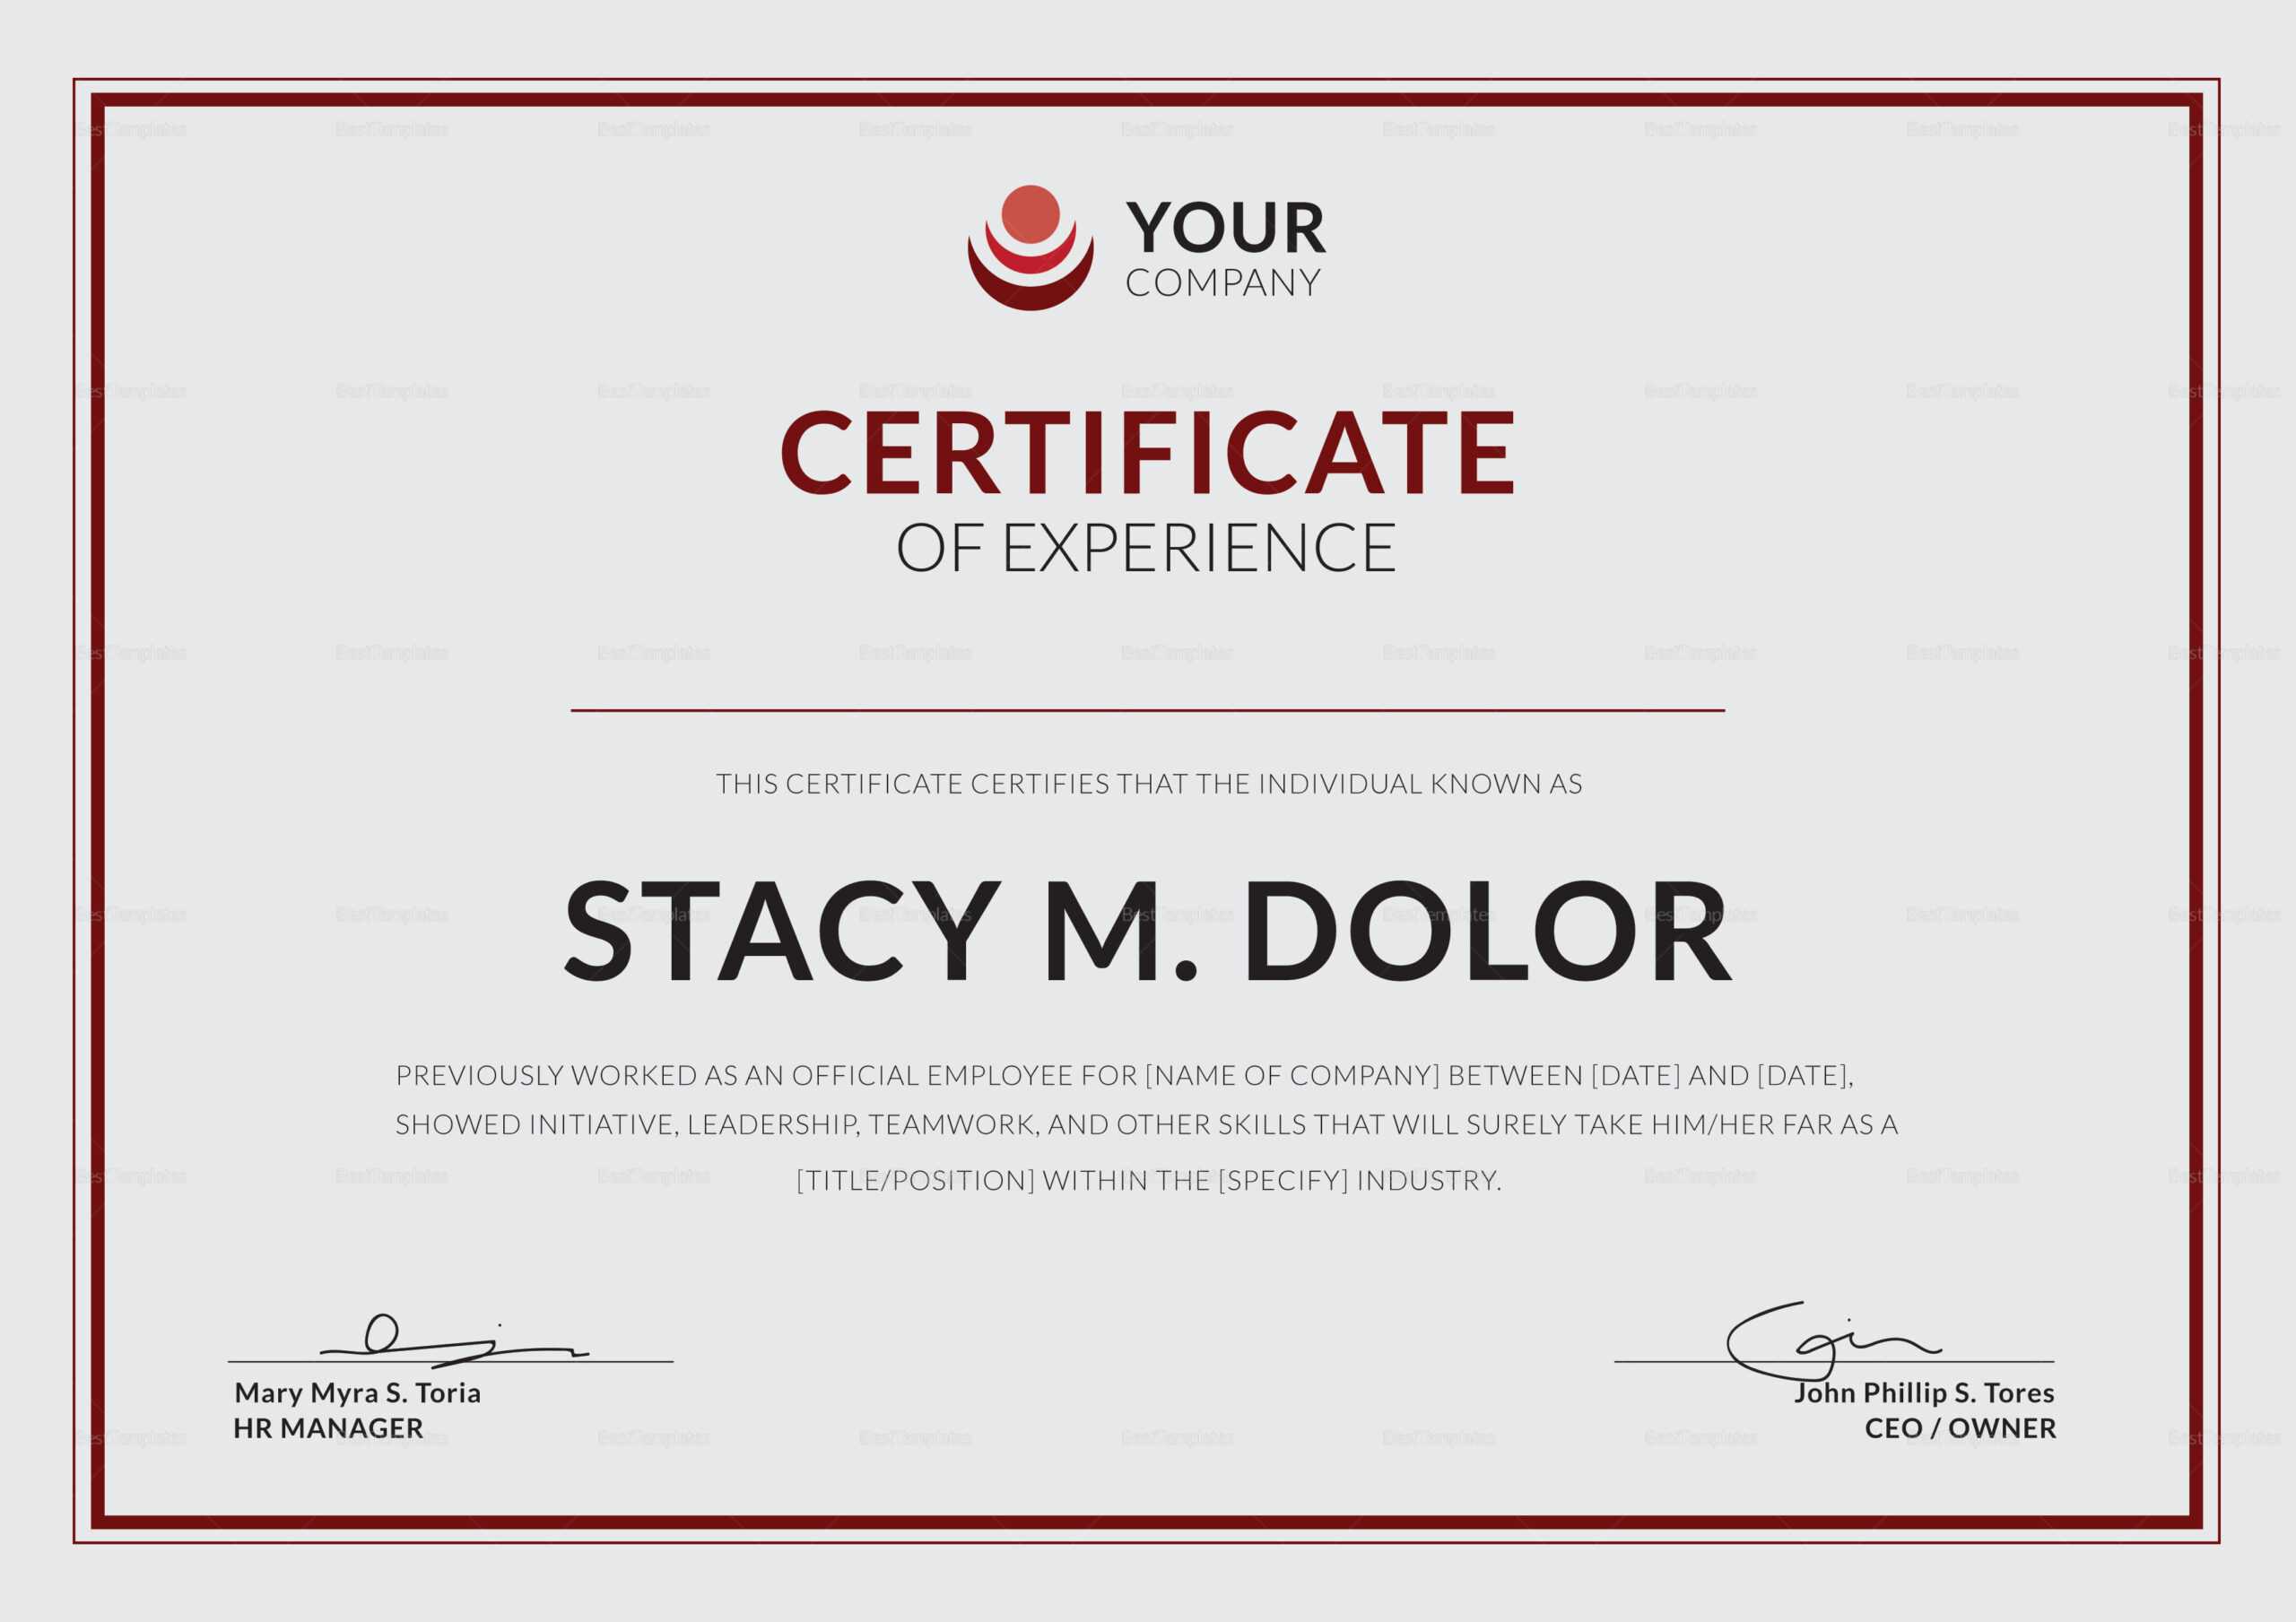 Employee Experience Certificate Template In Certificate Of Experience Template